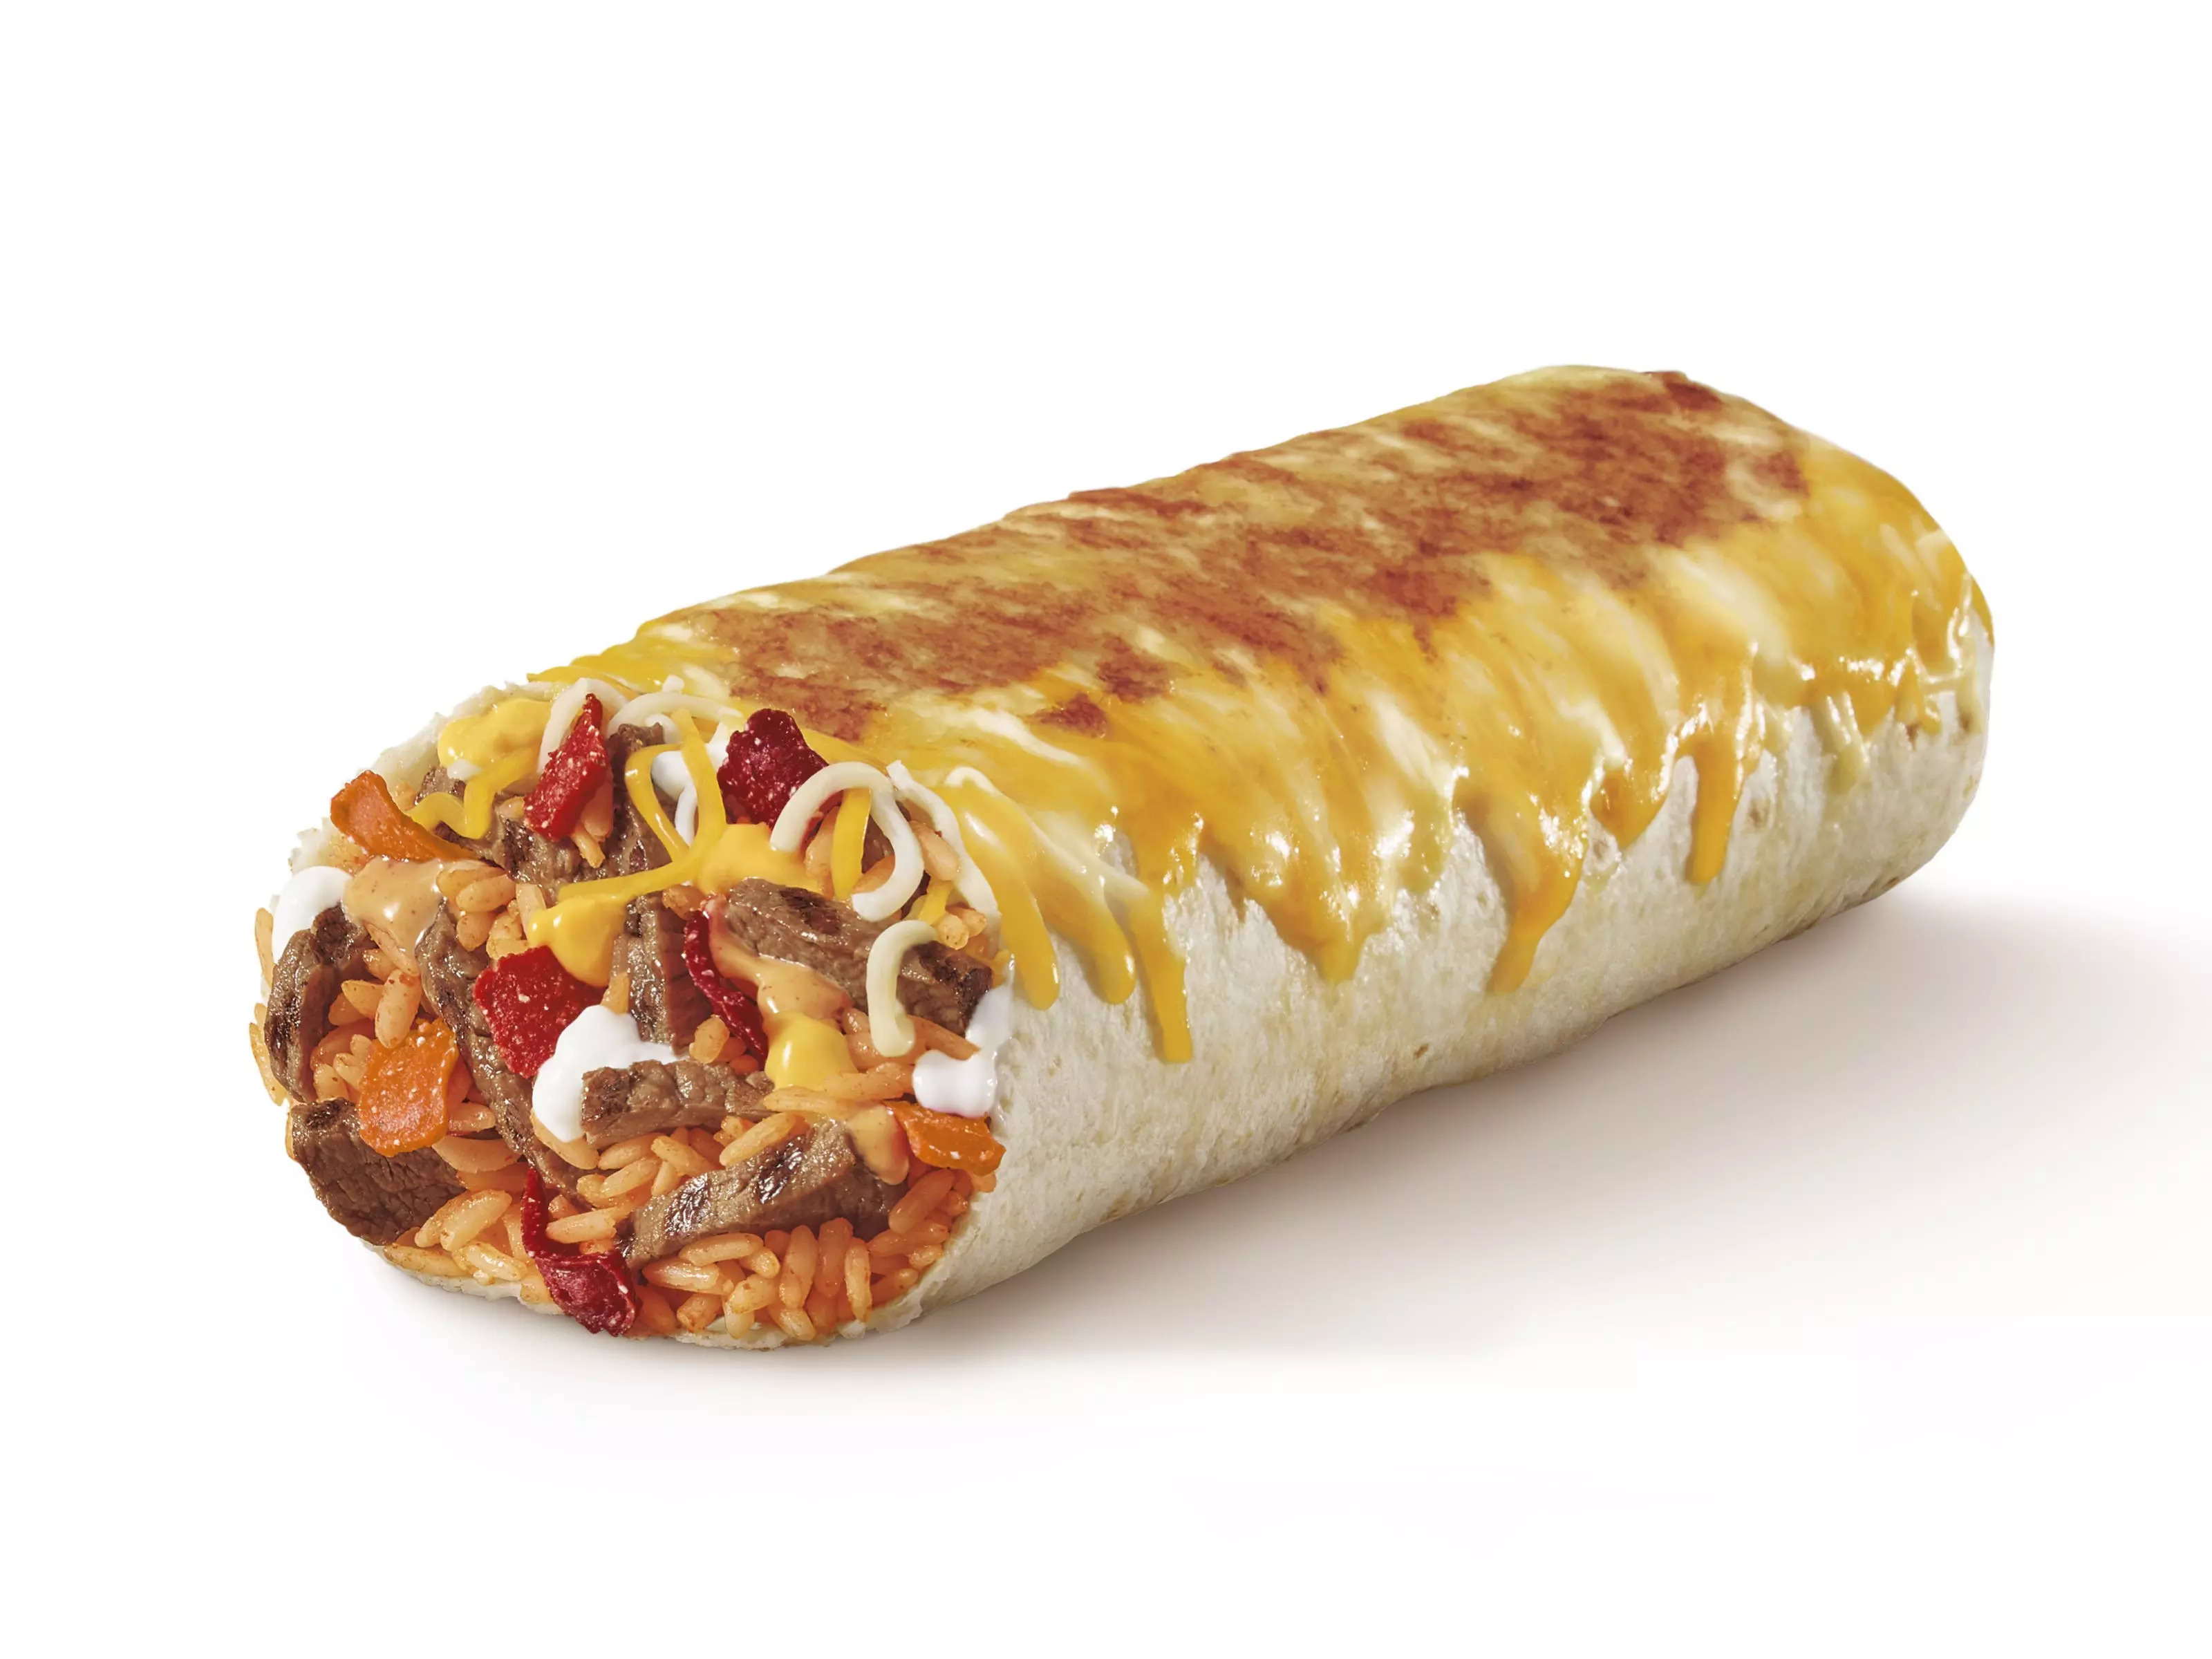 Taco bell double steak grilled cheese burrito nutrition